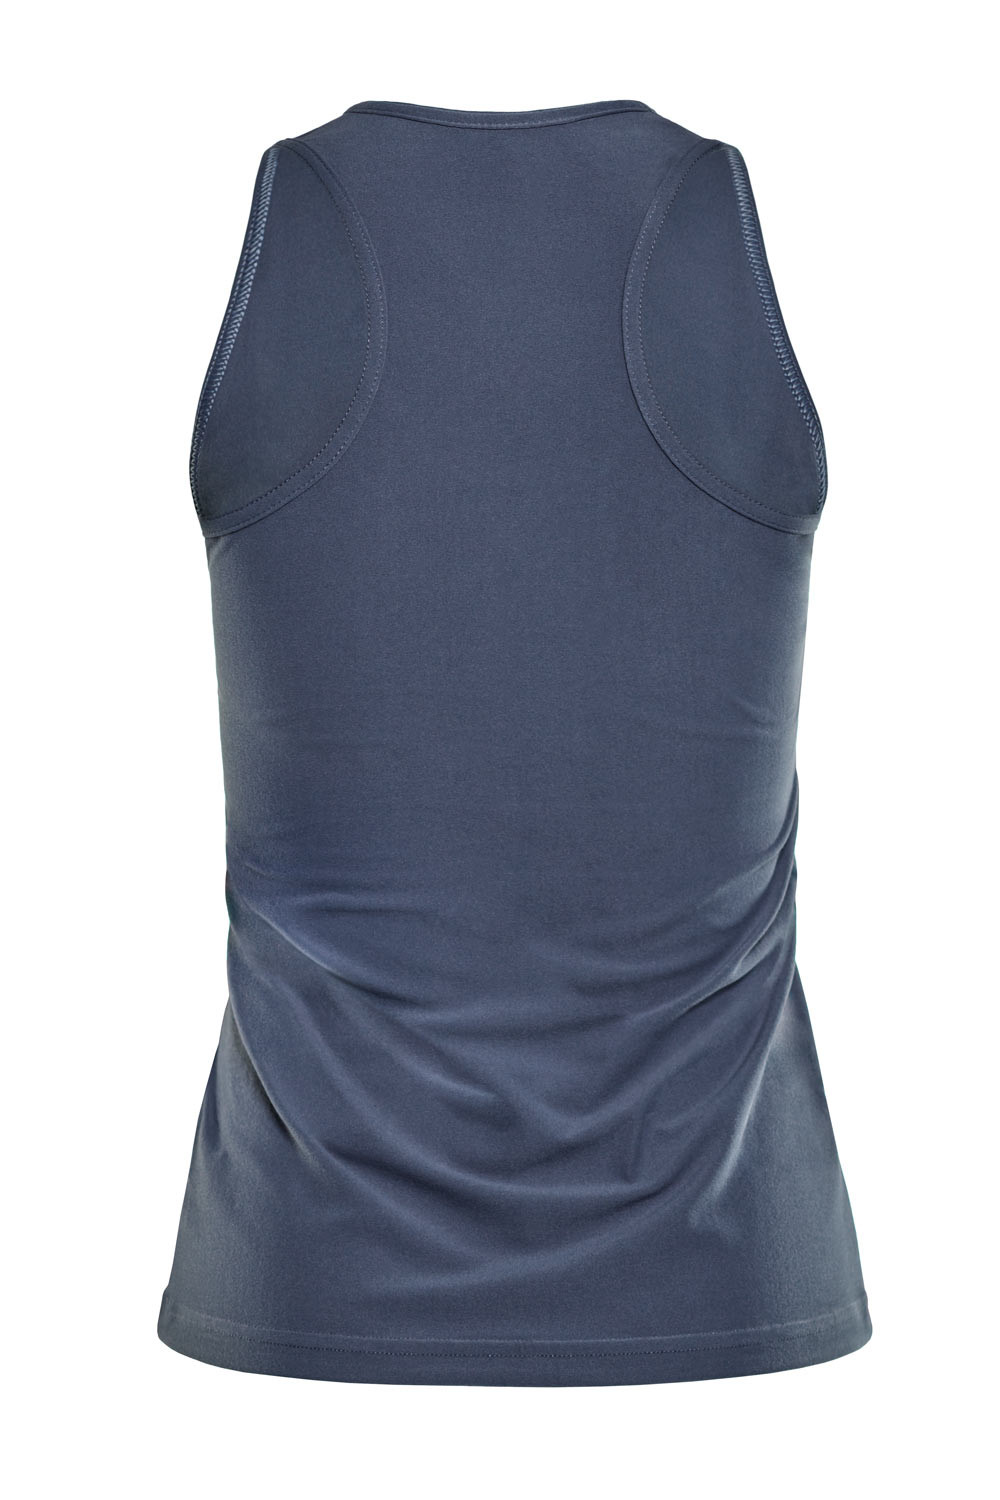 Tanktop anthrazit, Functional AET124LS, Winshape and Style Soft Ultra Light Soft